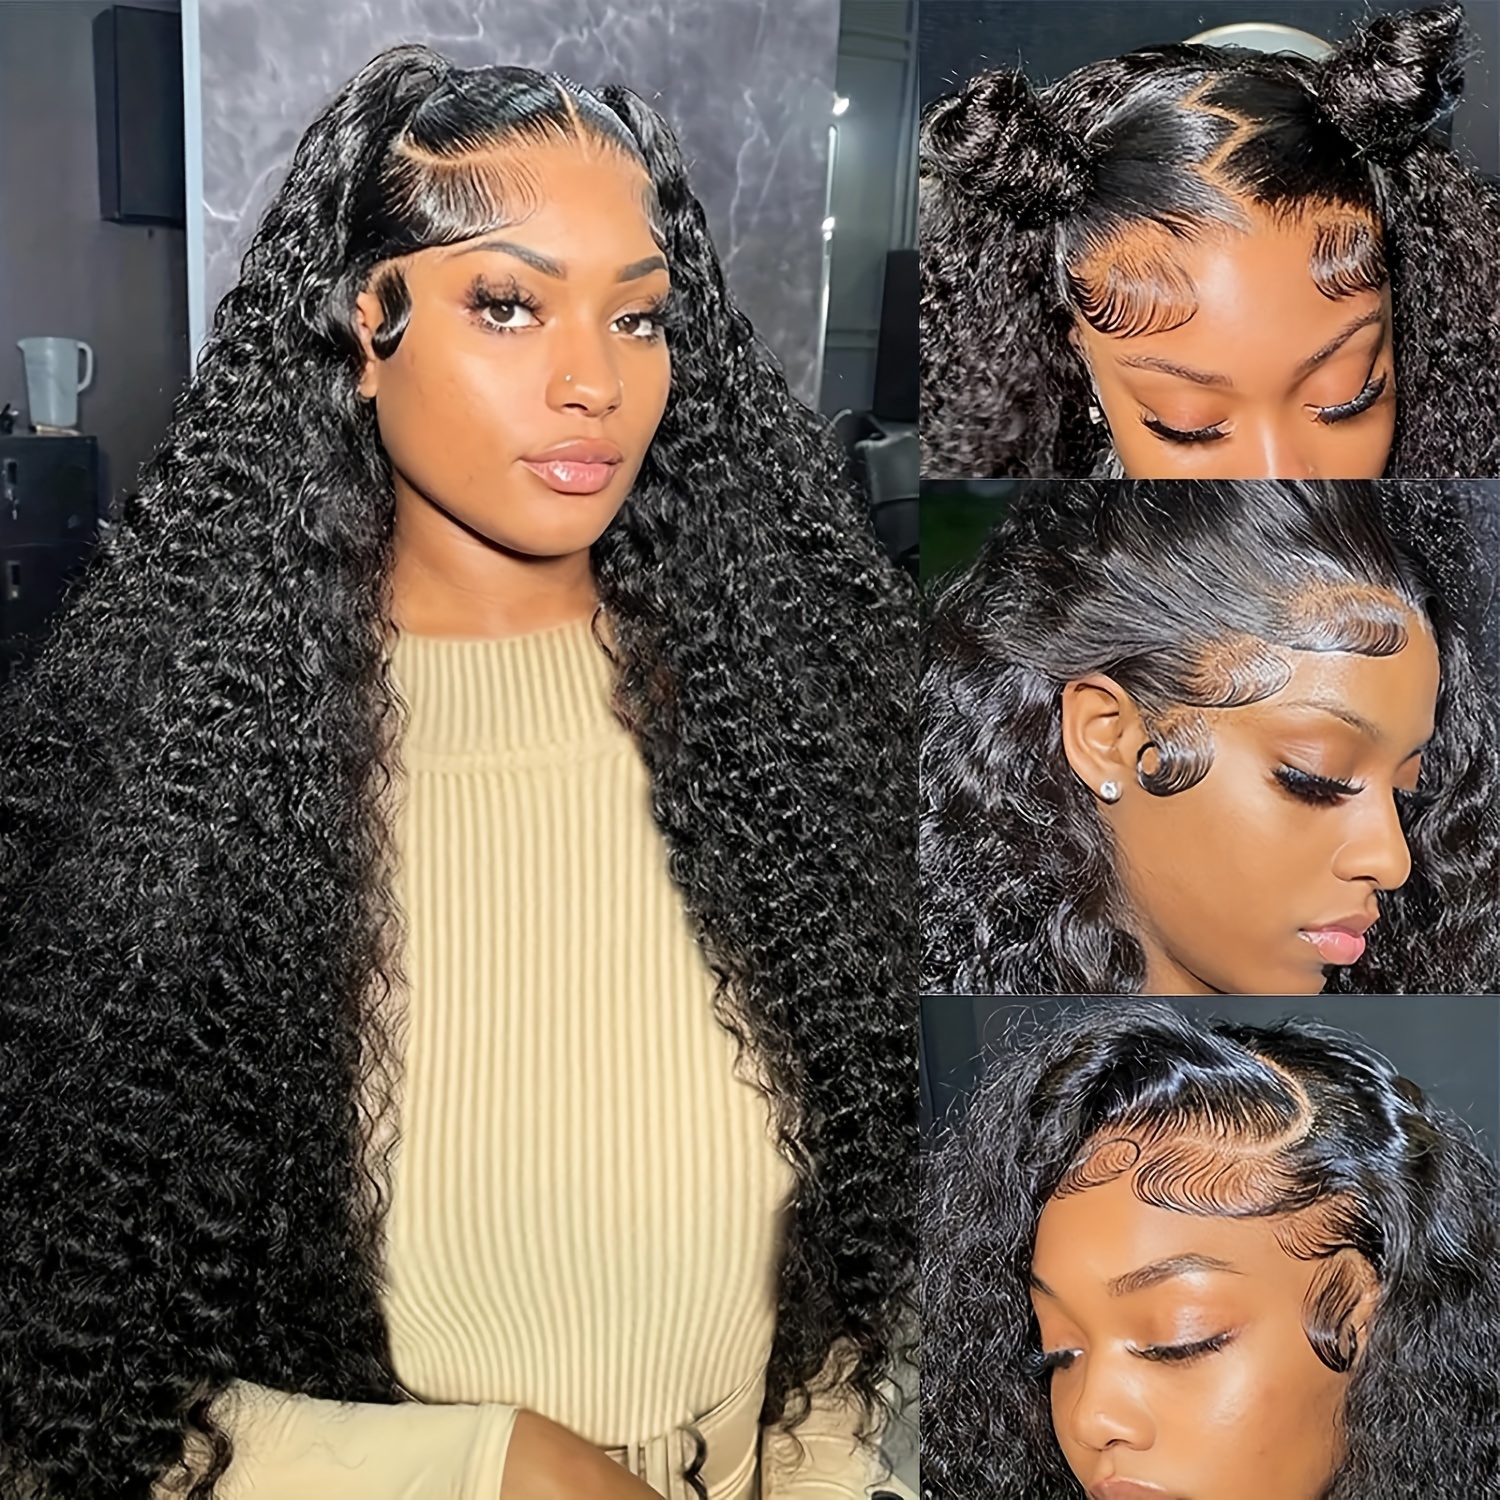 4GIRL4EVER Deep Wave Lace Front Wigs Human Hair 180% Denisty 13X4 Deep Wave  Frontal Wigs